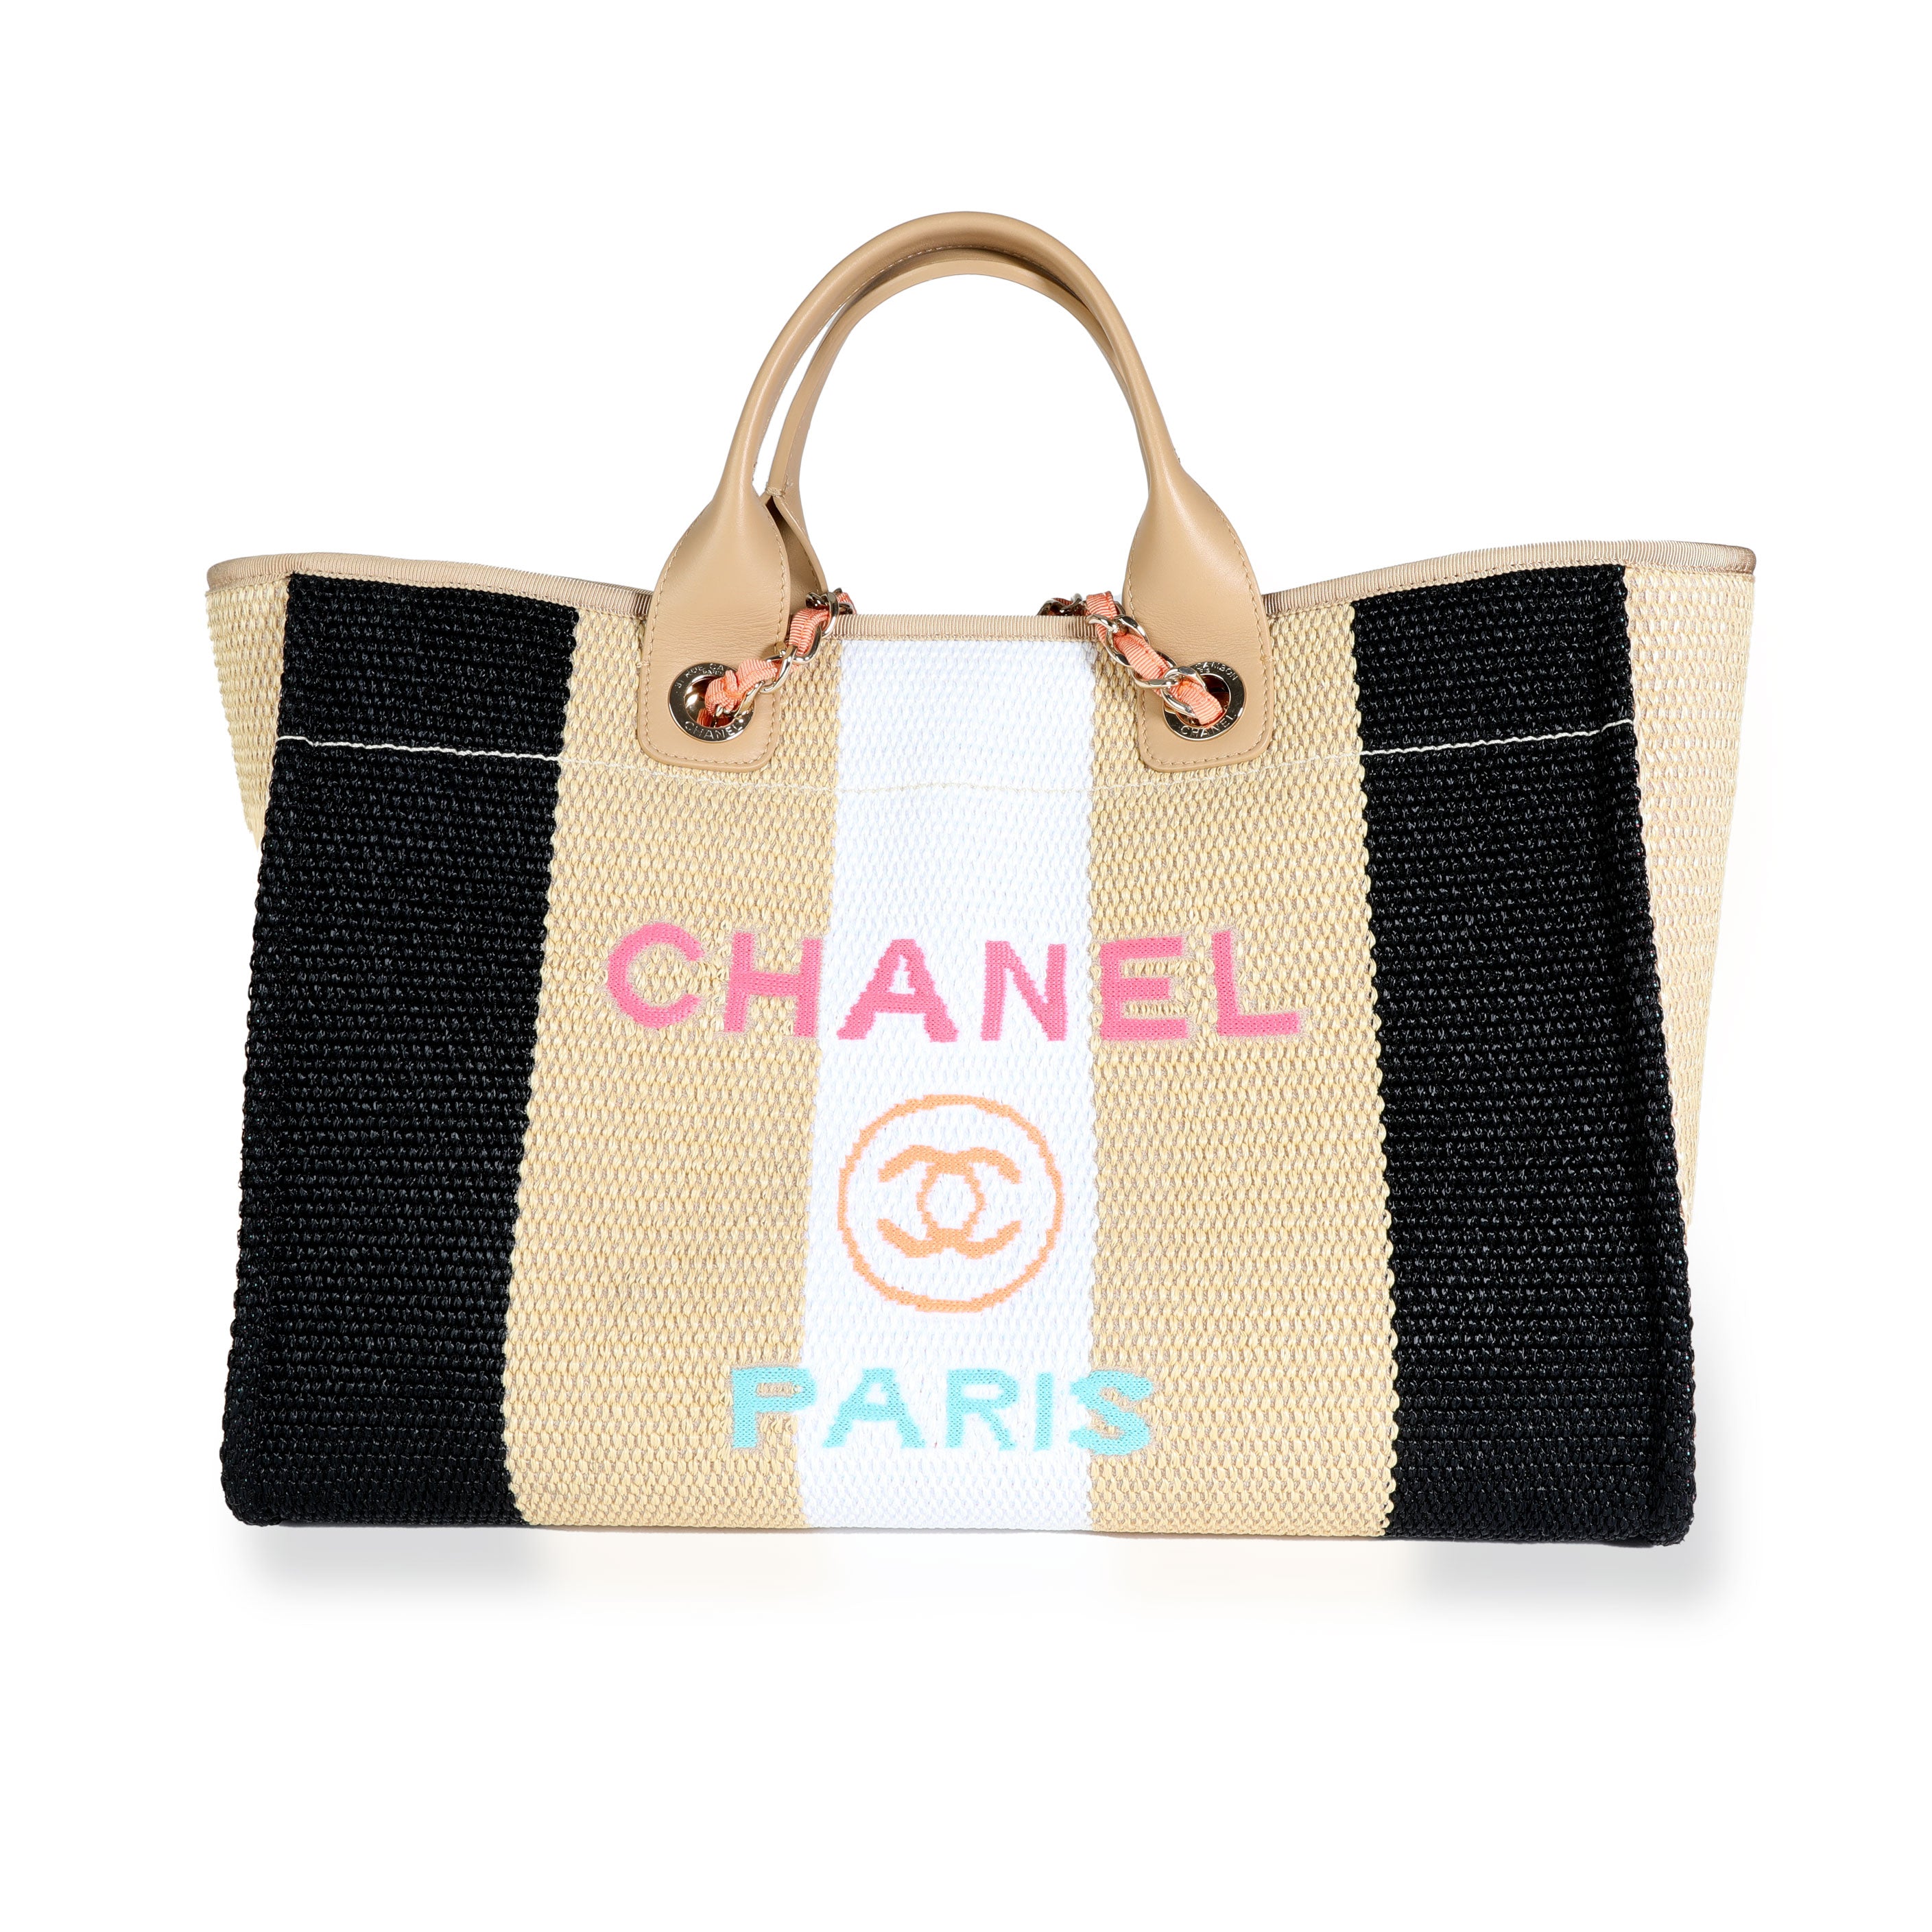 Chanel Bicolor Deauville Tote Large Bag – The Closet